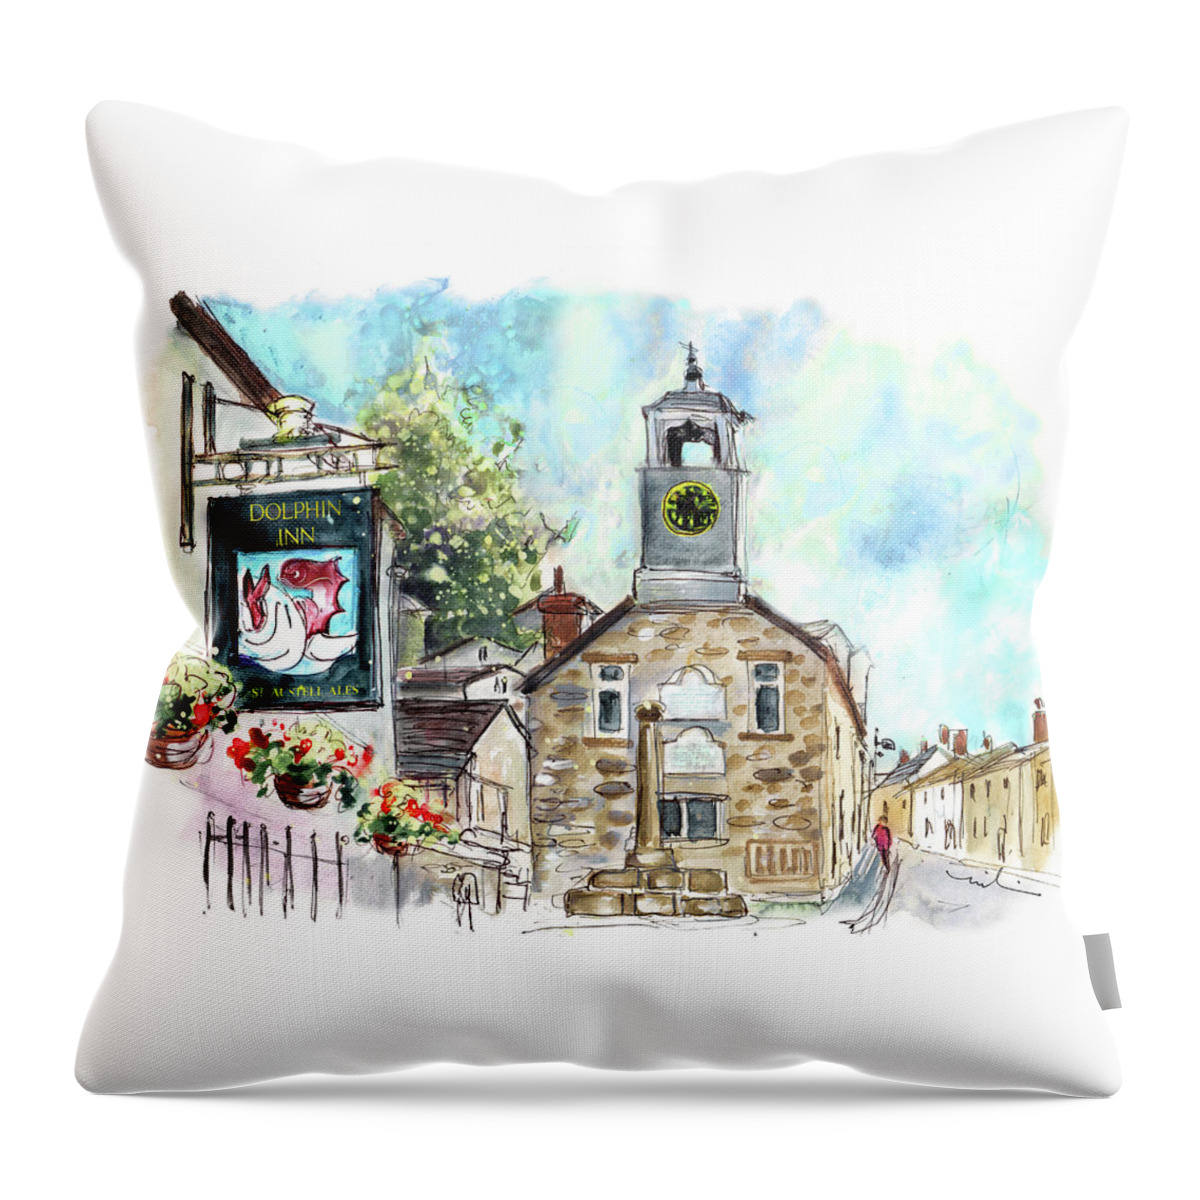 Travel Throw Pillow featuring the painting Dolphin Inn In Grampound by Miki De Goodaboom